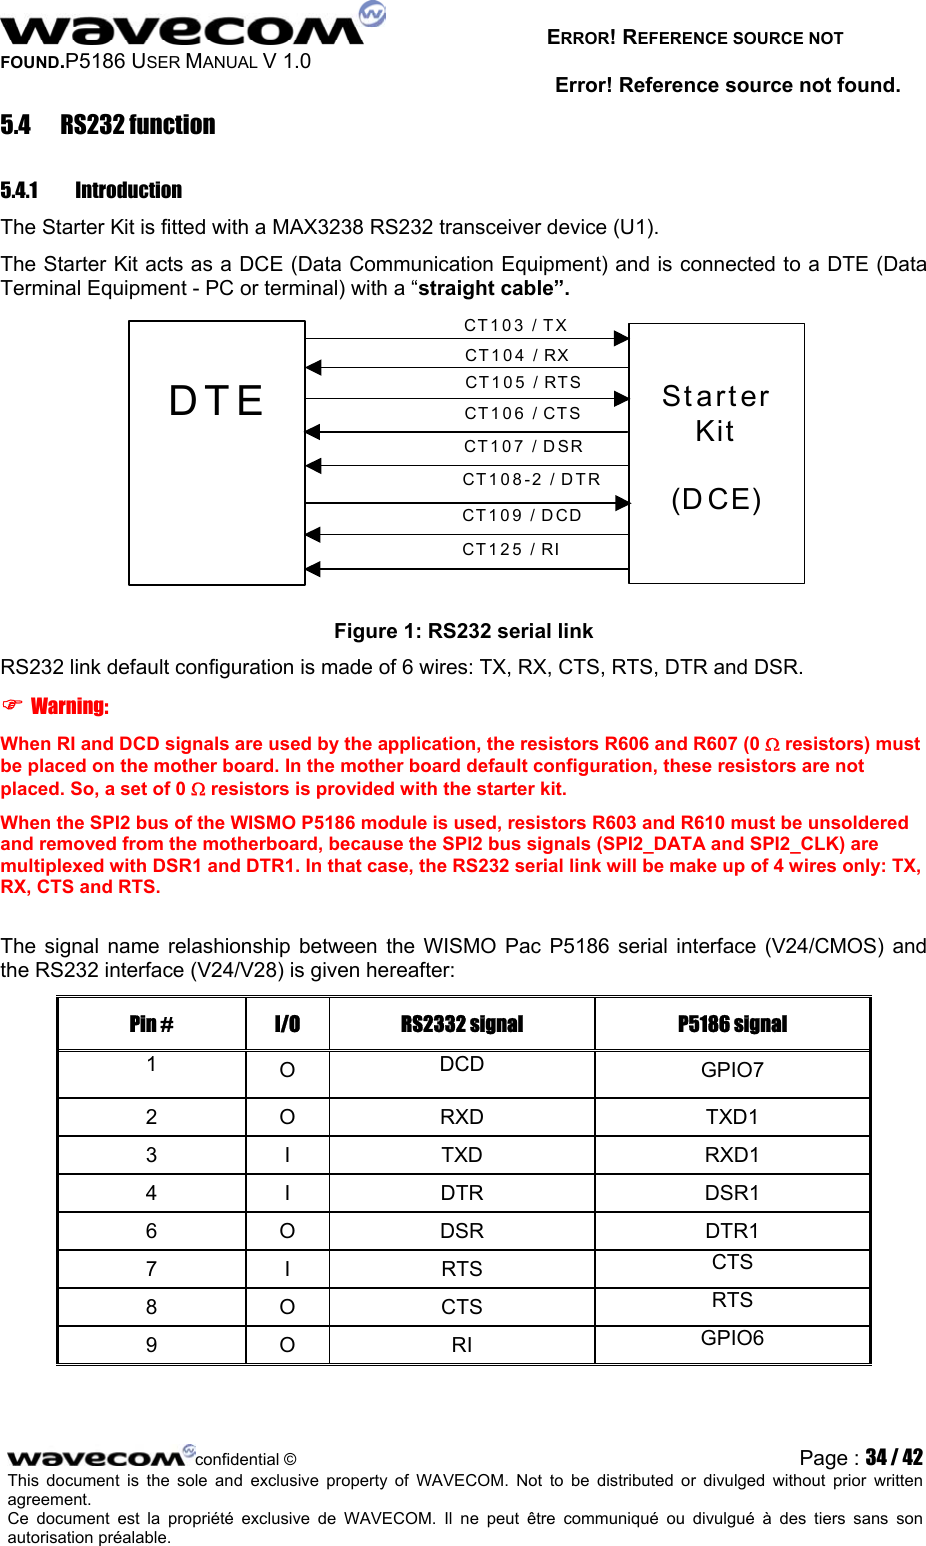   ERROR! REFERENCE SOURCE NOT FOUND.P5186 USER MANUAL V 1.0 Error! Reference source not found. 5.4  RS232 function  5.4.1 Introduction The Starter Kit is fitted with a MAX3238 RS232 transceiver device (U1). The Starter Kit acts as a DCE (Data Communication Equipment) and is connected to a DTE (Data Terminal Equipment - PC or terminal) with a “straight cable”.   DTE  Starter Kit  (DCE)  CT103 / TXCT108-2 / DTRCT105 / RTSCT104 / RXCT106 / CTSCT107 / DSRCT109 / DCDCT125 / RI Figure 1: RS232 serial link RS232 link default configuration is made of 6 wires: TX, RX, CTS, RTS, DTR and DSR.  Warning: When RI and DCD signals are used by the application, the resistors R606 and R607 (0 Ω resistors) must be placed on the mother board. In the mother board default configuration, these resistors are not placed. So, a set of 0 Ω resistors is provided with the starter kit. When the SPI2 bus of the WISMO P5186 module is used, resistors R603 and R610 must be unsoldered and removed from the motherboard, because the SPI2 bus signals (SPI2_DATA and SPI2_CLK) are multiplexed with DSR1 and DTR1. In that case, the RS232 serial link will be make up of 4 wires only: TX, RX, CTS and RTS.  The signal name relashionship between the WISMO Pac P5186 serial interface (V24/CMOS) and the RS232 interface (V24/V28) is given hereafter: Pin #  I/O  RS2332 signal  P5186 signal 1  O  DCD  GPIO7 2 O  RXD  TXD1 3 I  TXD  RXD1 4 I  DTR  DSR1 6 O  DSR  DTR1 7 I  RTS  CTS 8 O  CTS  RTS 9 O  RI  GPIO6 confidential © Page : 34 / 42This document is the sole and exclusive property of WAVECOM. Not to be distributed or divulged without prior written agreement.  Ce document est la propriété exclusive de WAVECOM. Il ne peut être communiqué ou divulgué à des tiers sans son autorisation préalable.  